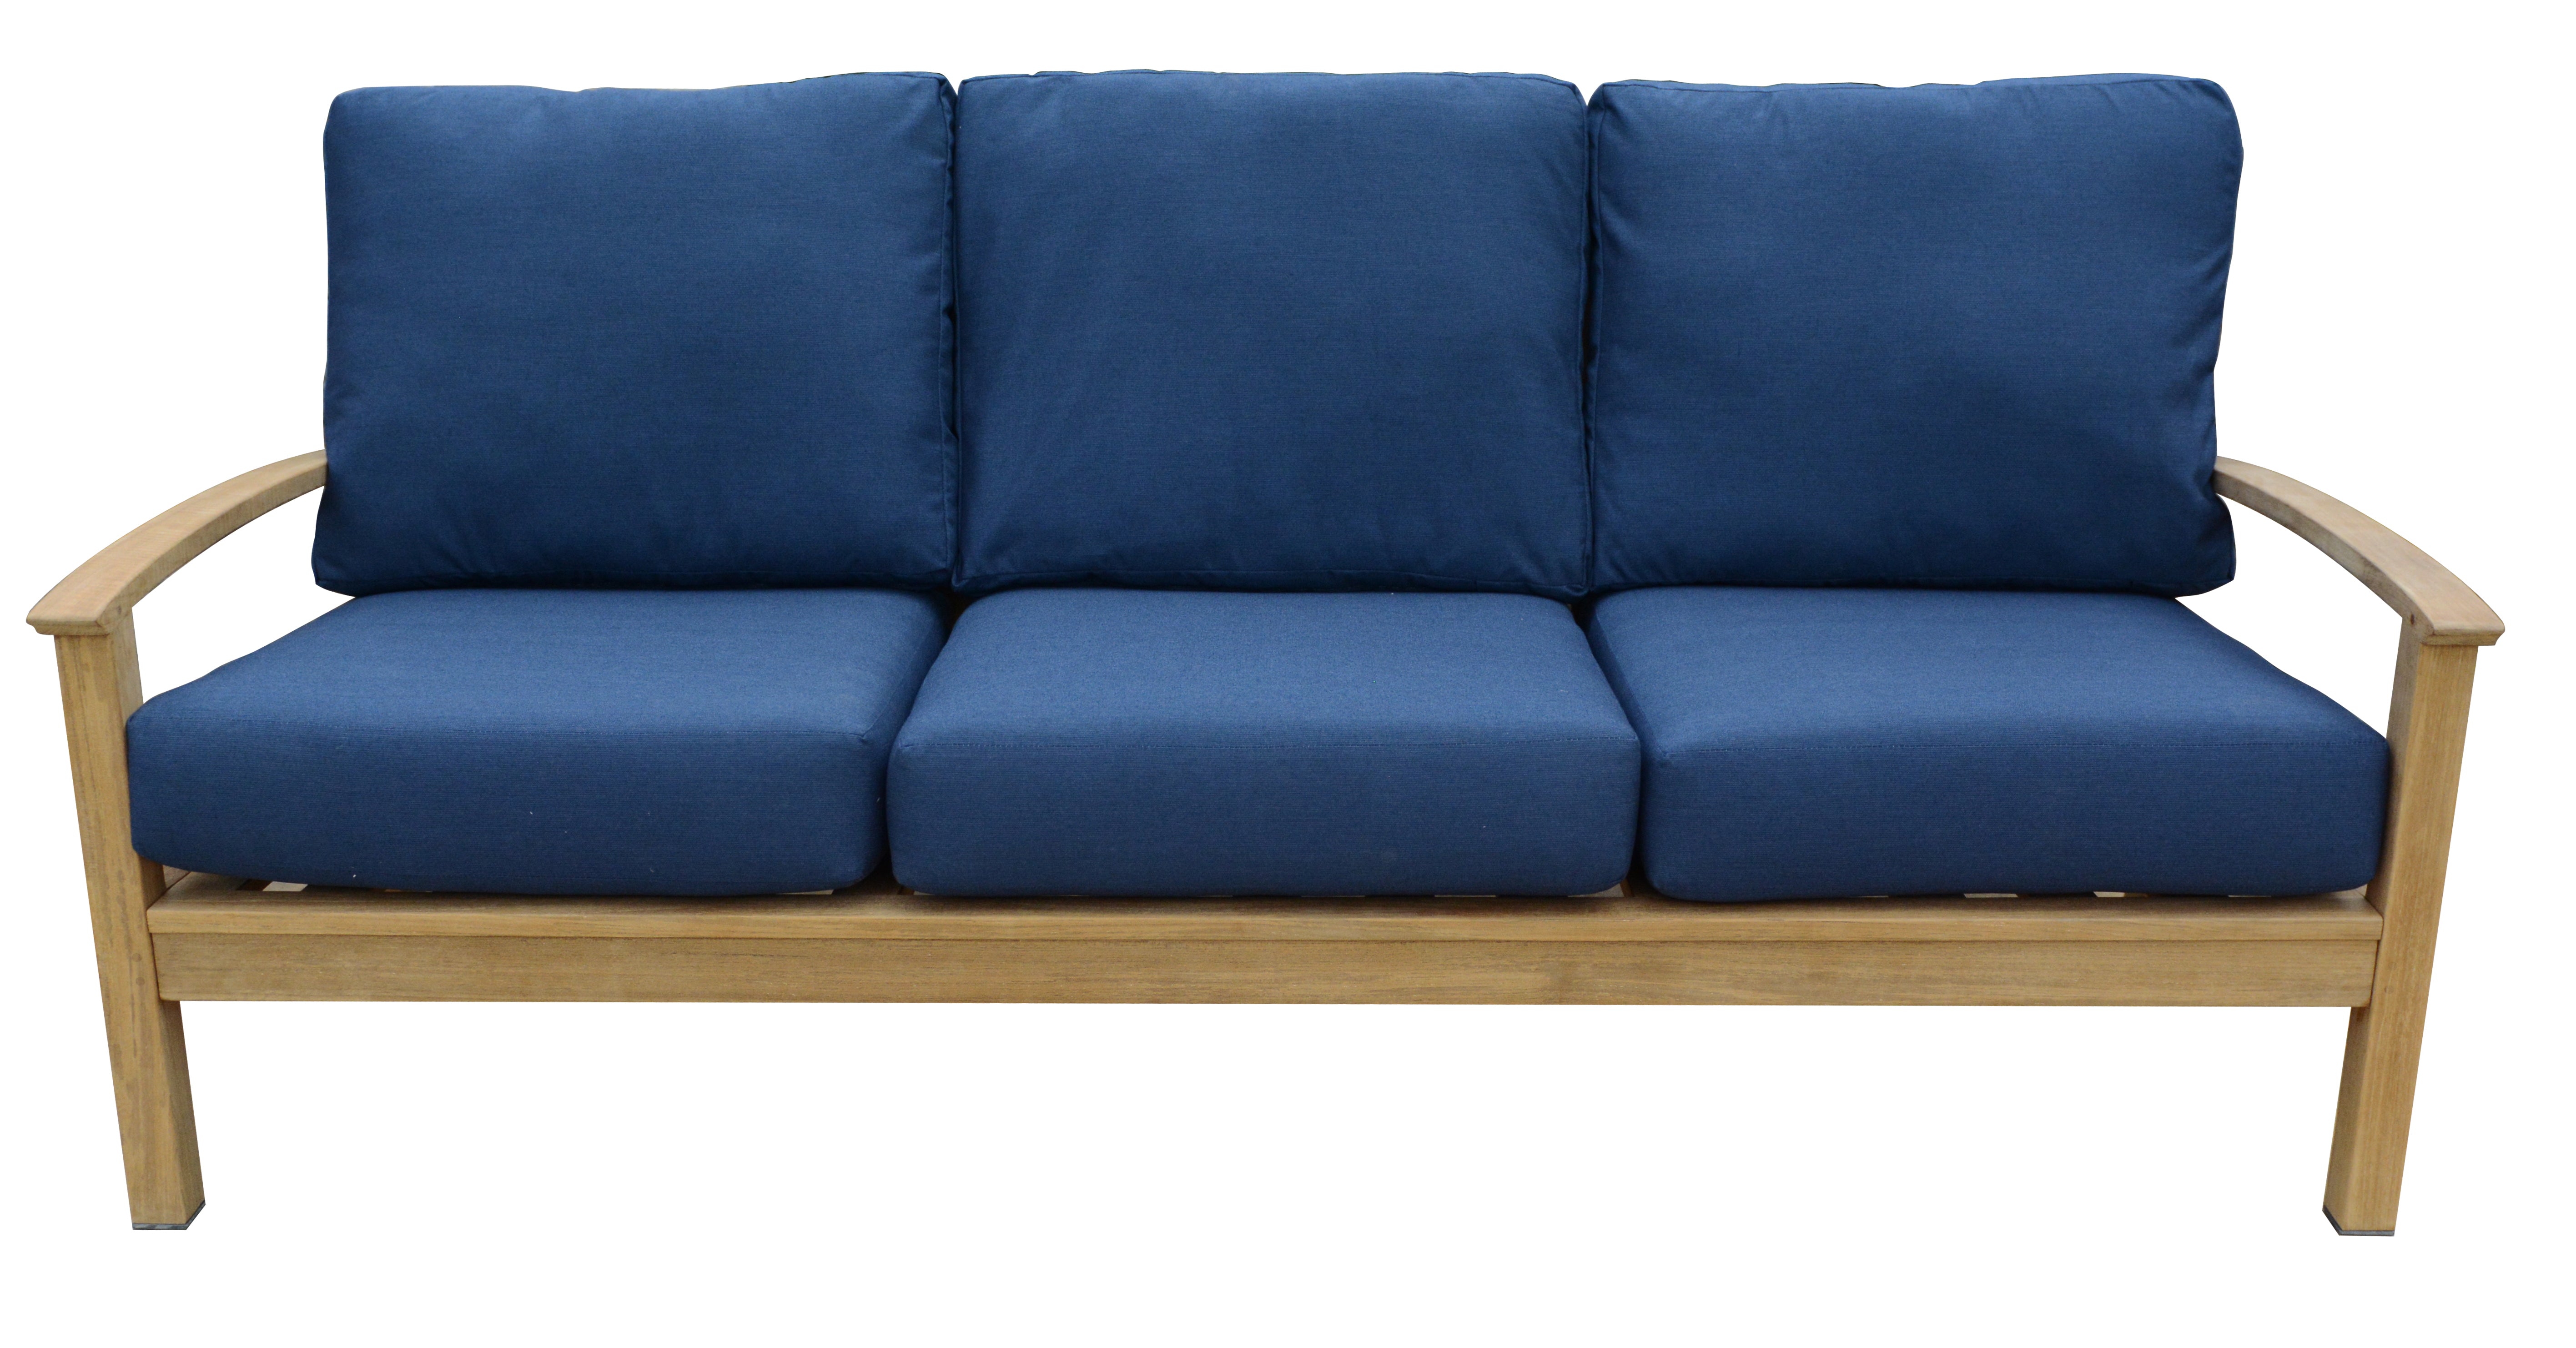 St. Lucia Deep Seating 3 Seater Sofa